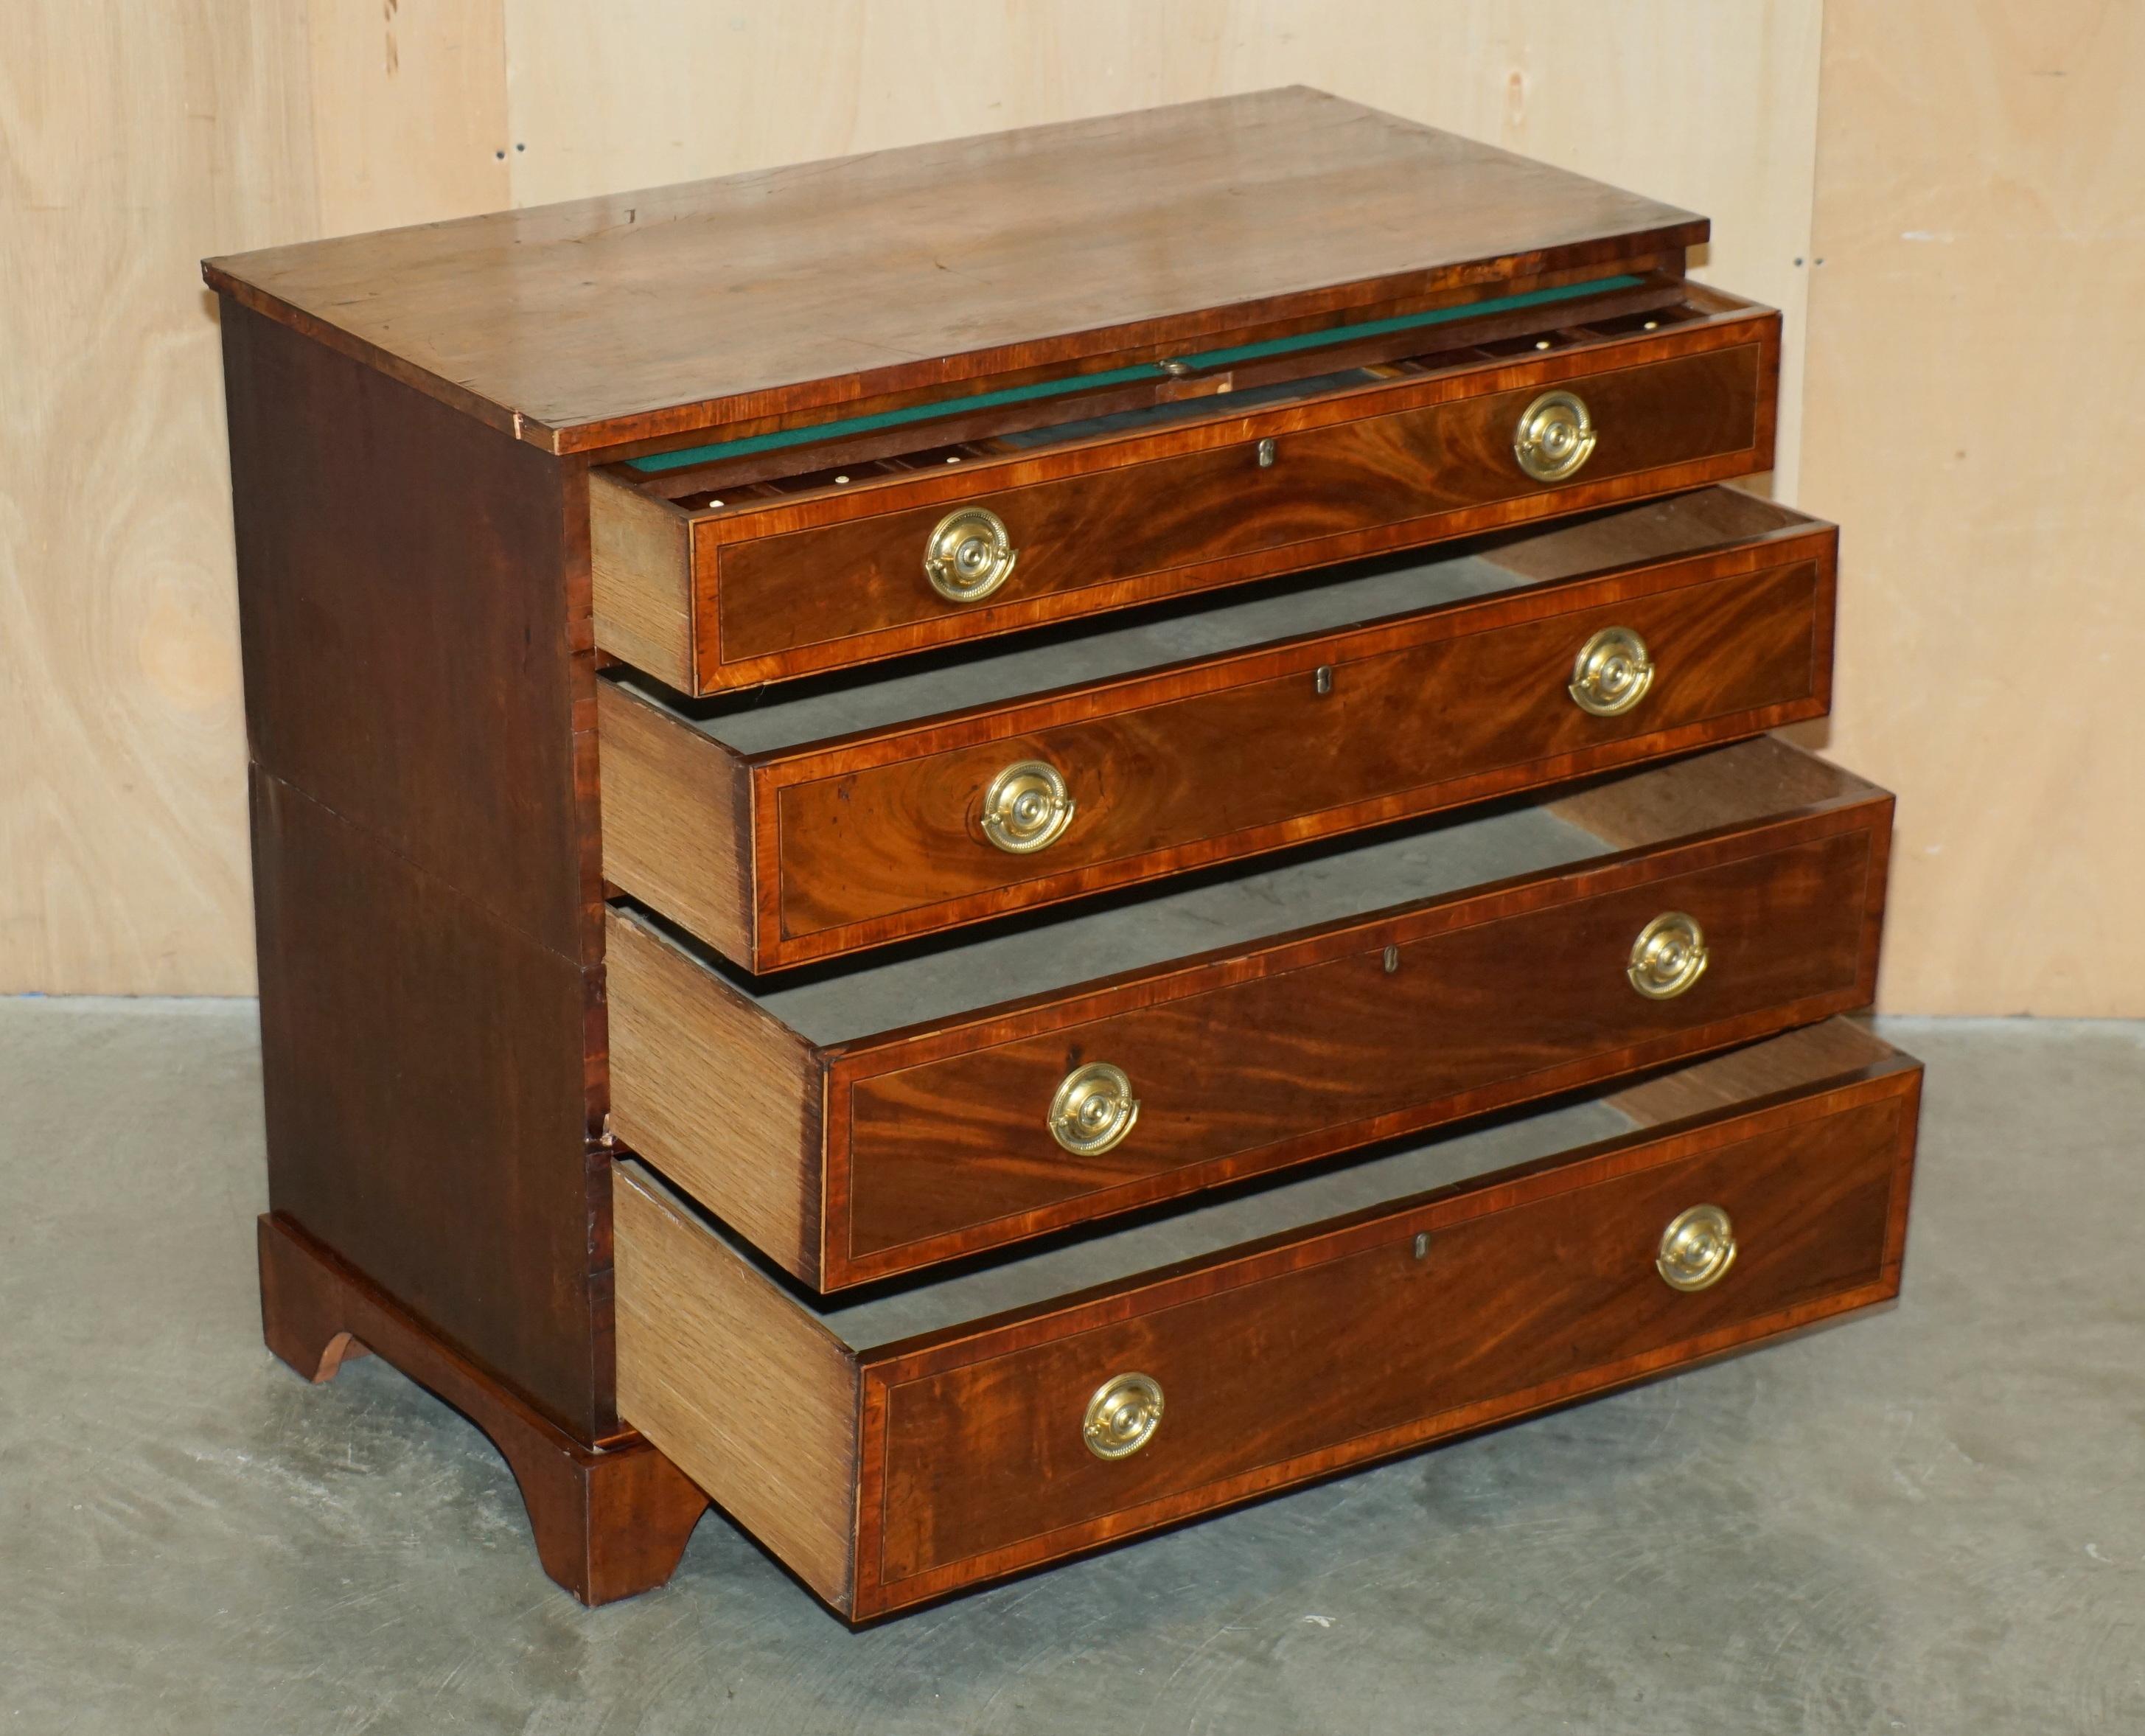 ANTiQUE GEORGE III BACHELORS CHEST OF DRAWERS ATTRIBUTED TO GILLOWS OF LANCASTER im Angebot 7